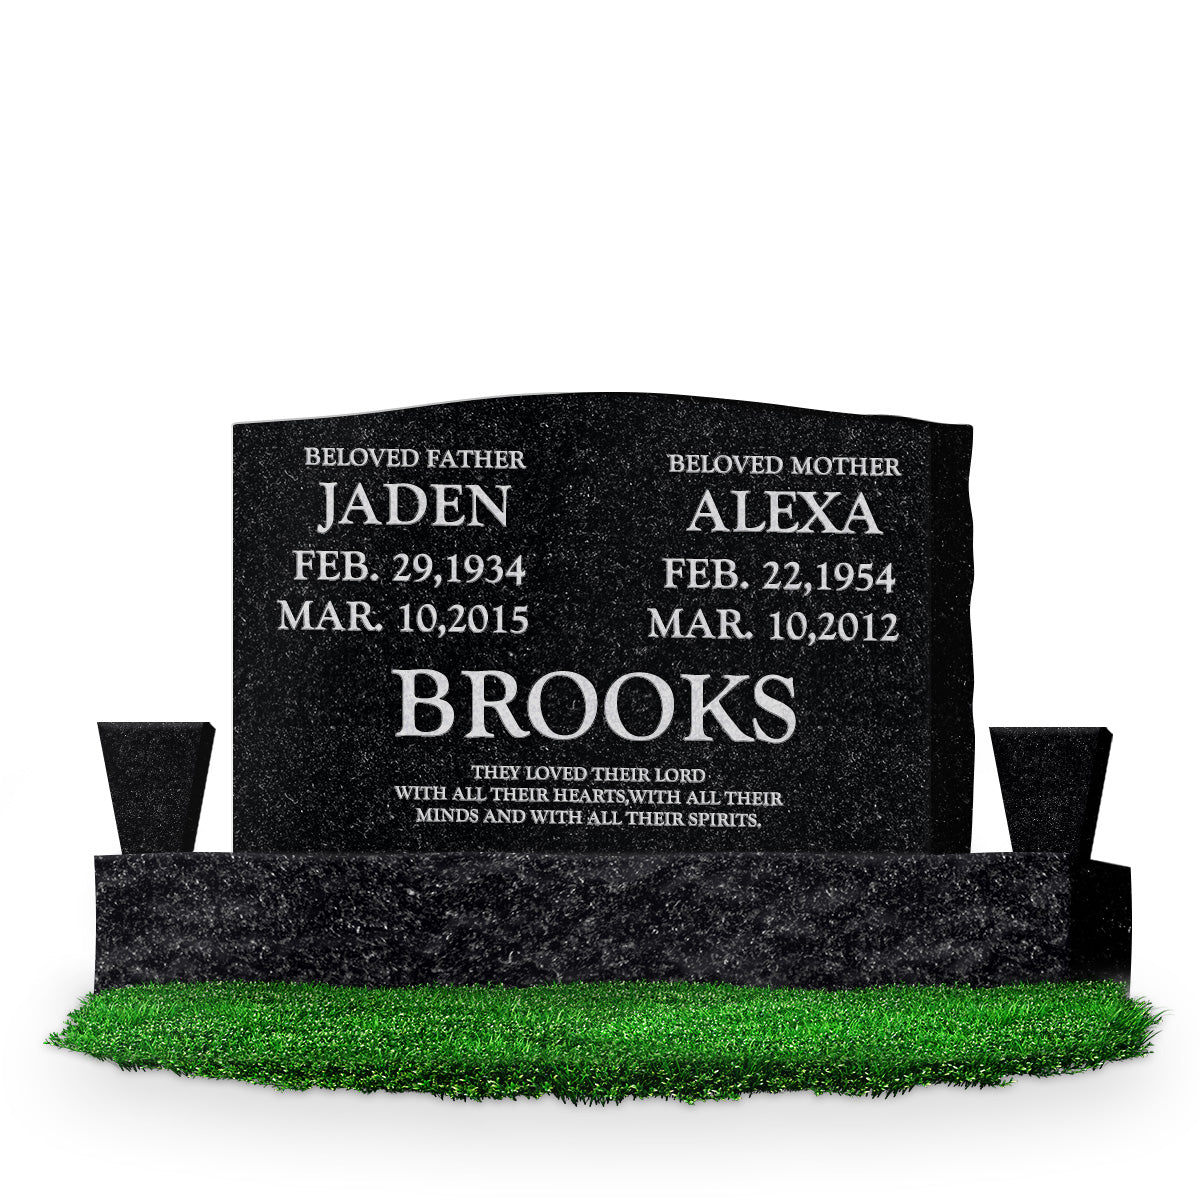 36″ x 6″ x 24″ Serp Top Upright Headstone: polished front and back; 60″ base; two square tapered vases; Companion/Text